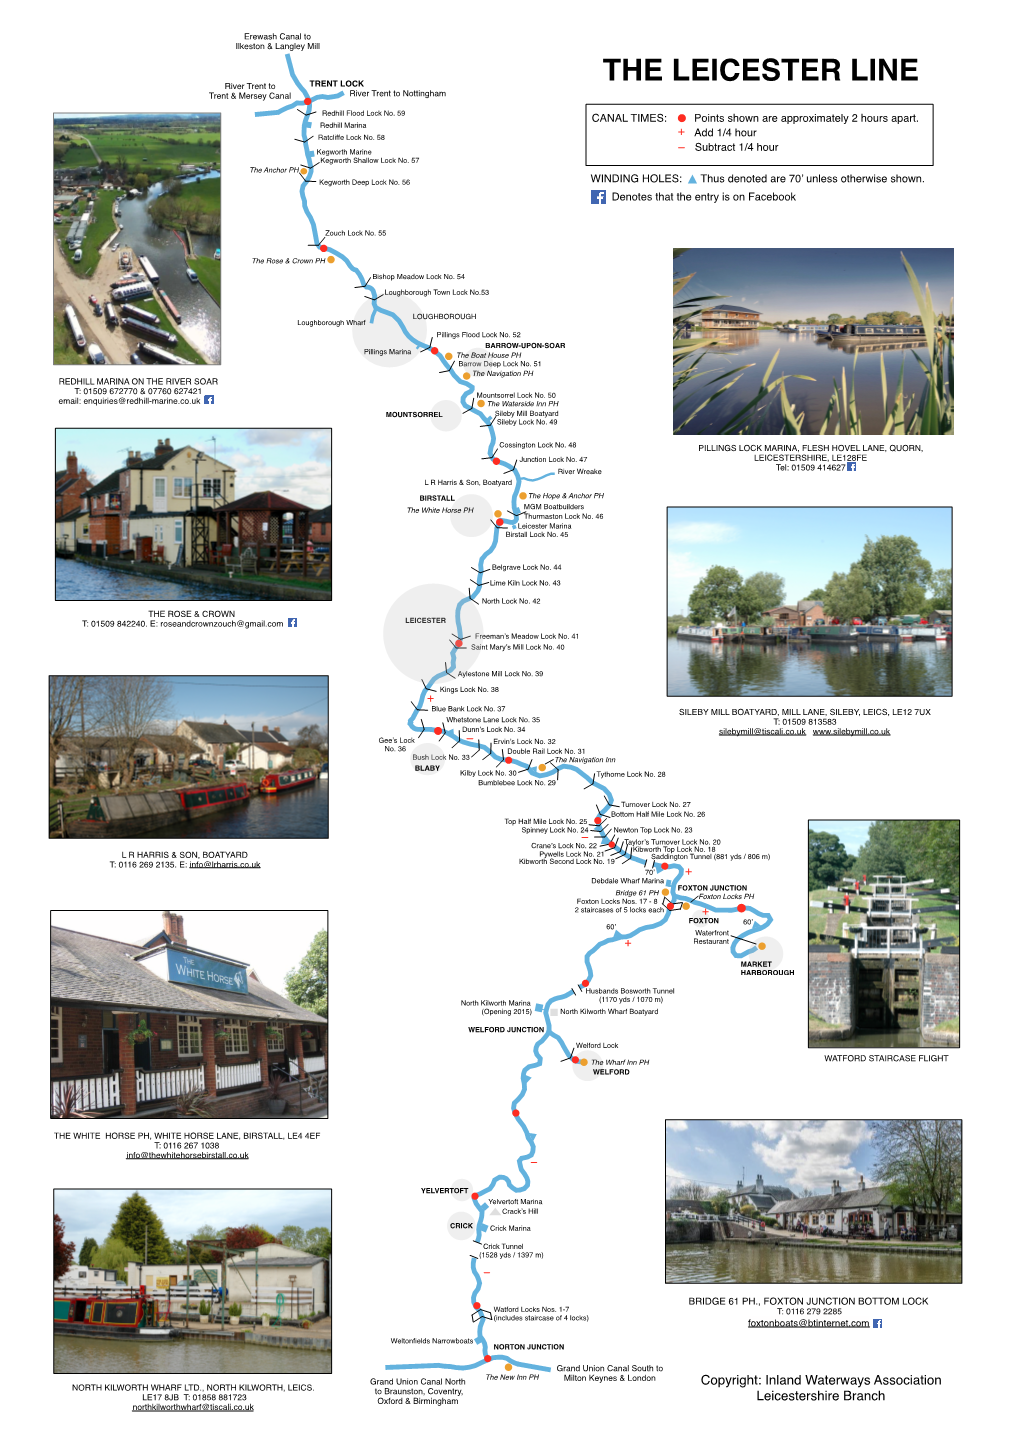 THE LEICESTER LINE River Trent to TRENT LOCK Trent & Mersey Canal River Trent to Nottingham